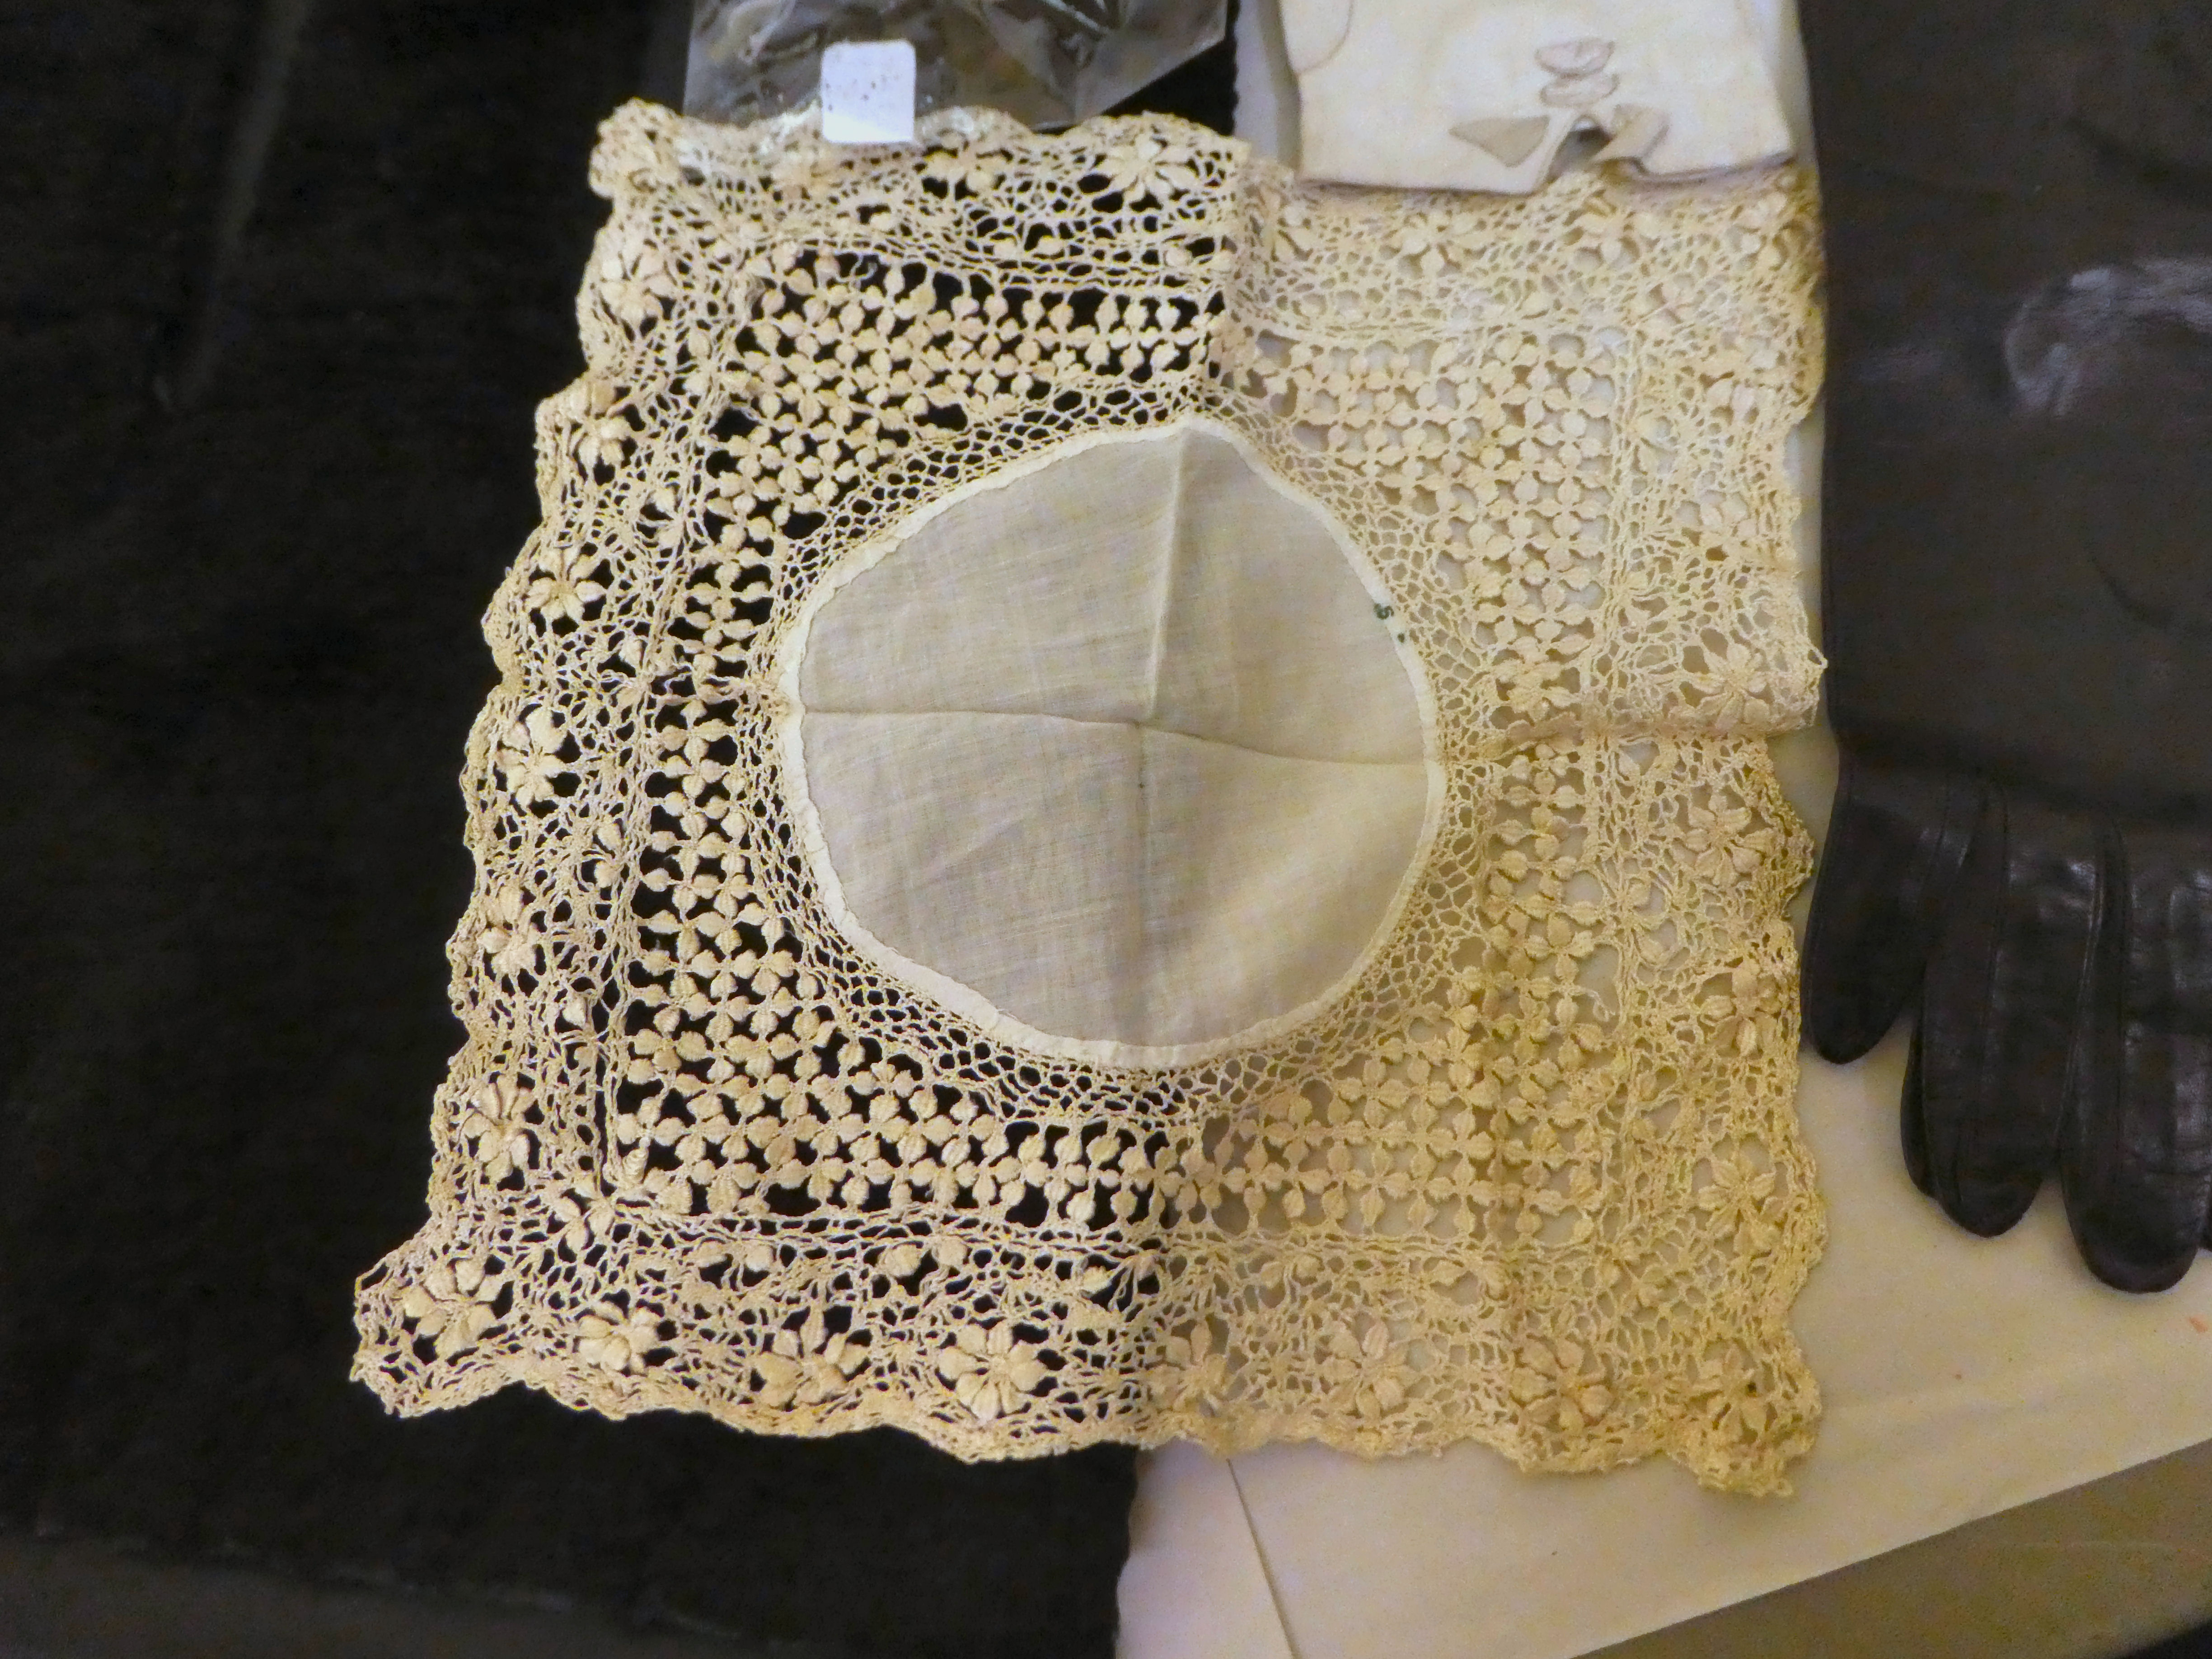 Period lace and ladies fashion accessories: to include a Radley handbag - Image 3 of 10